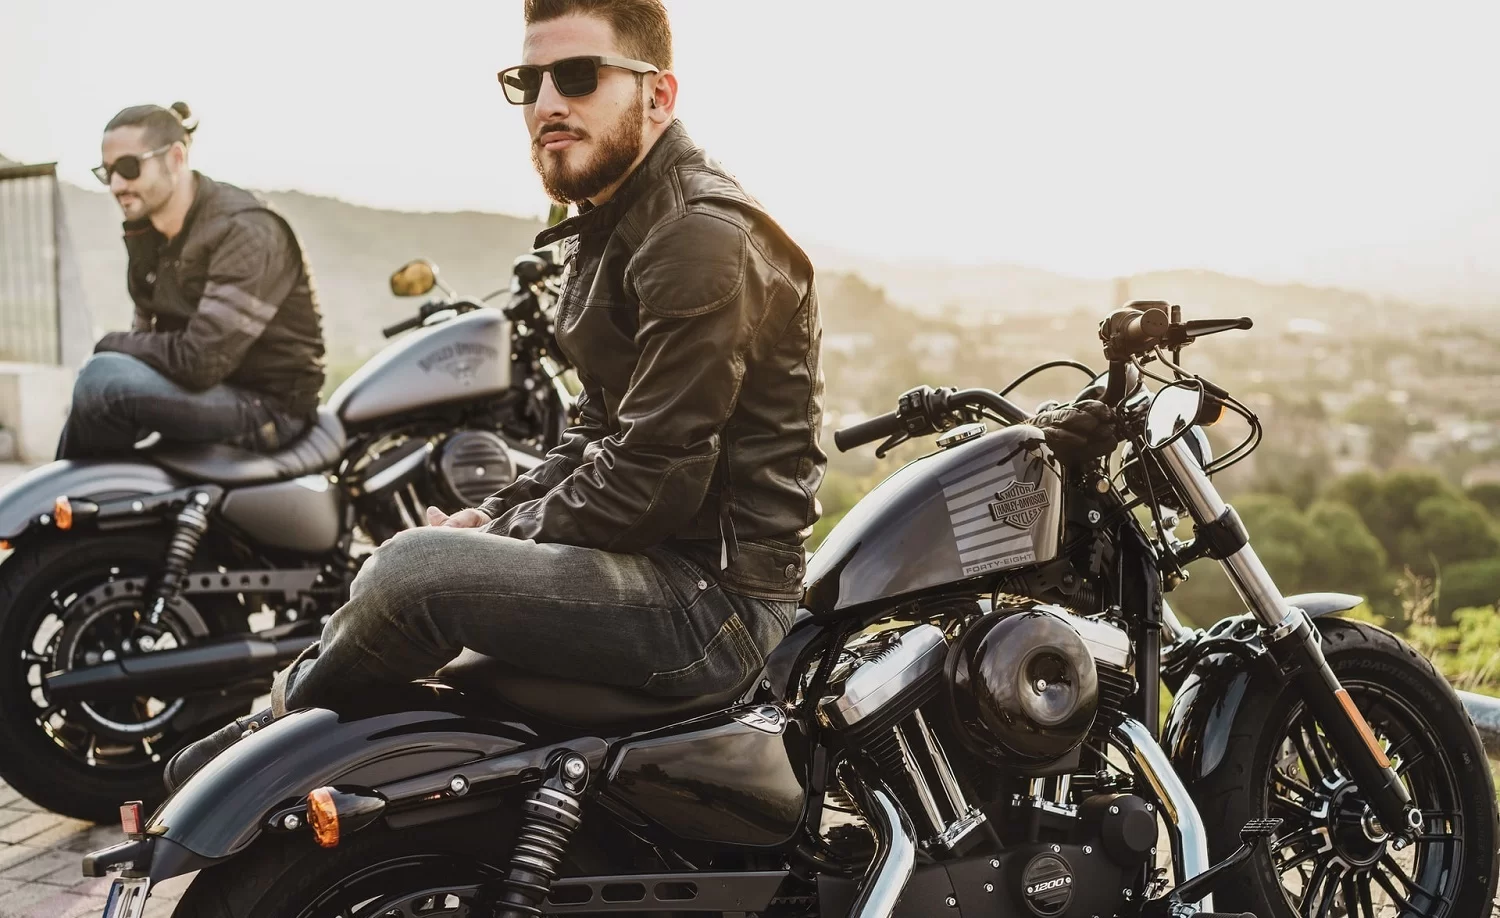 Types of Riding Glasses for Motorcyclists